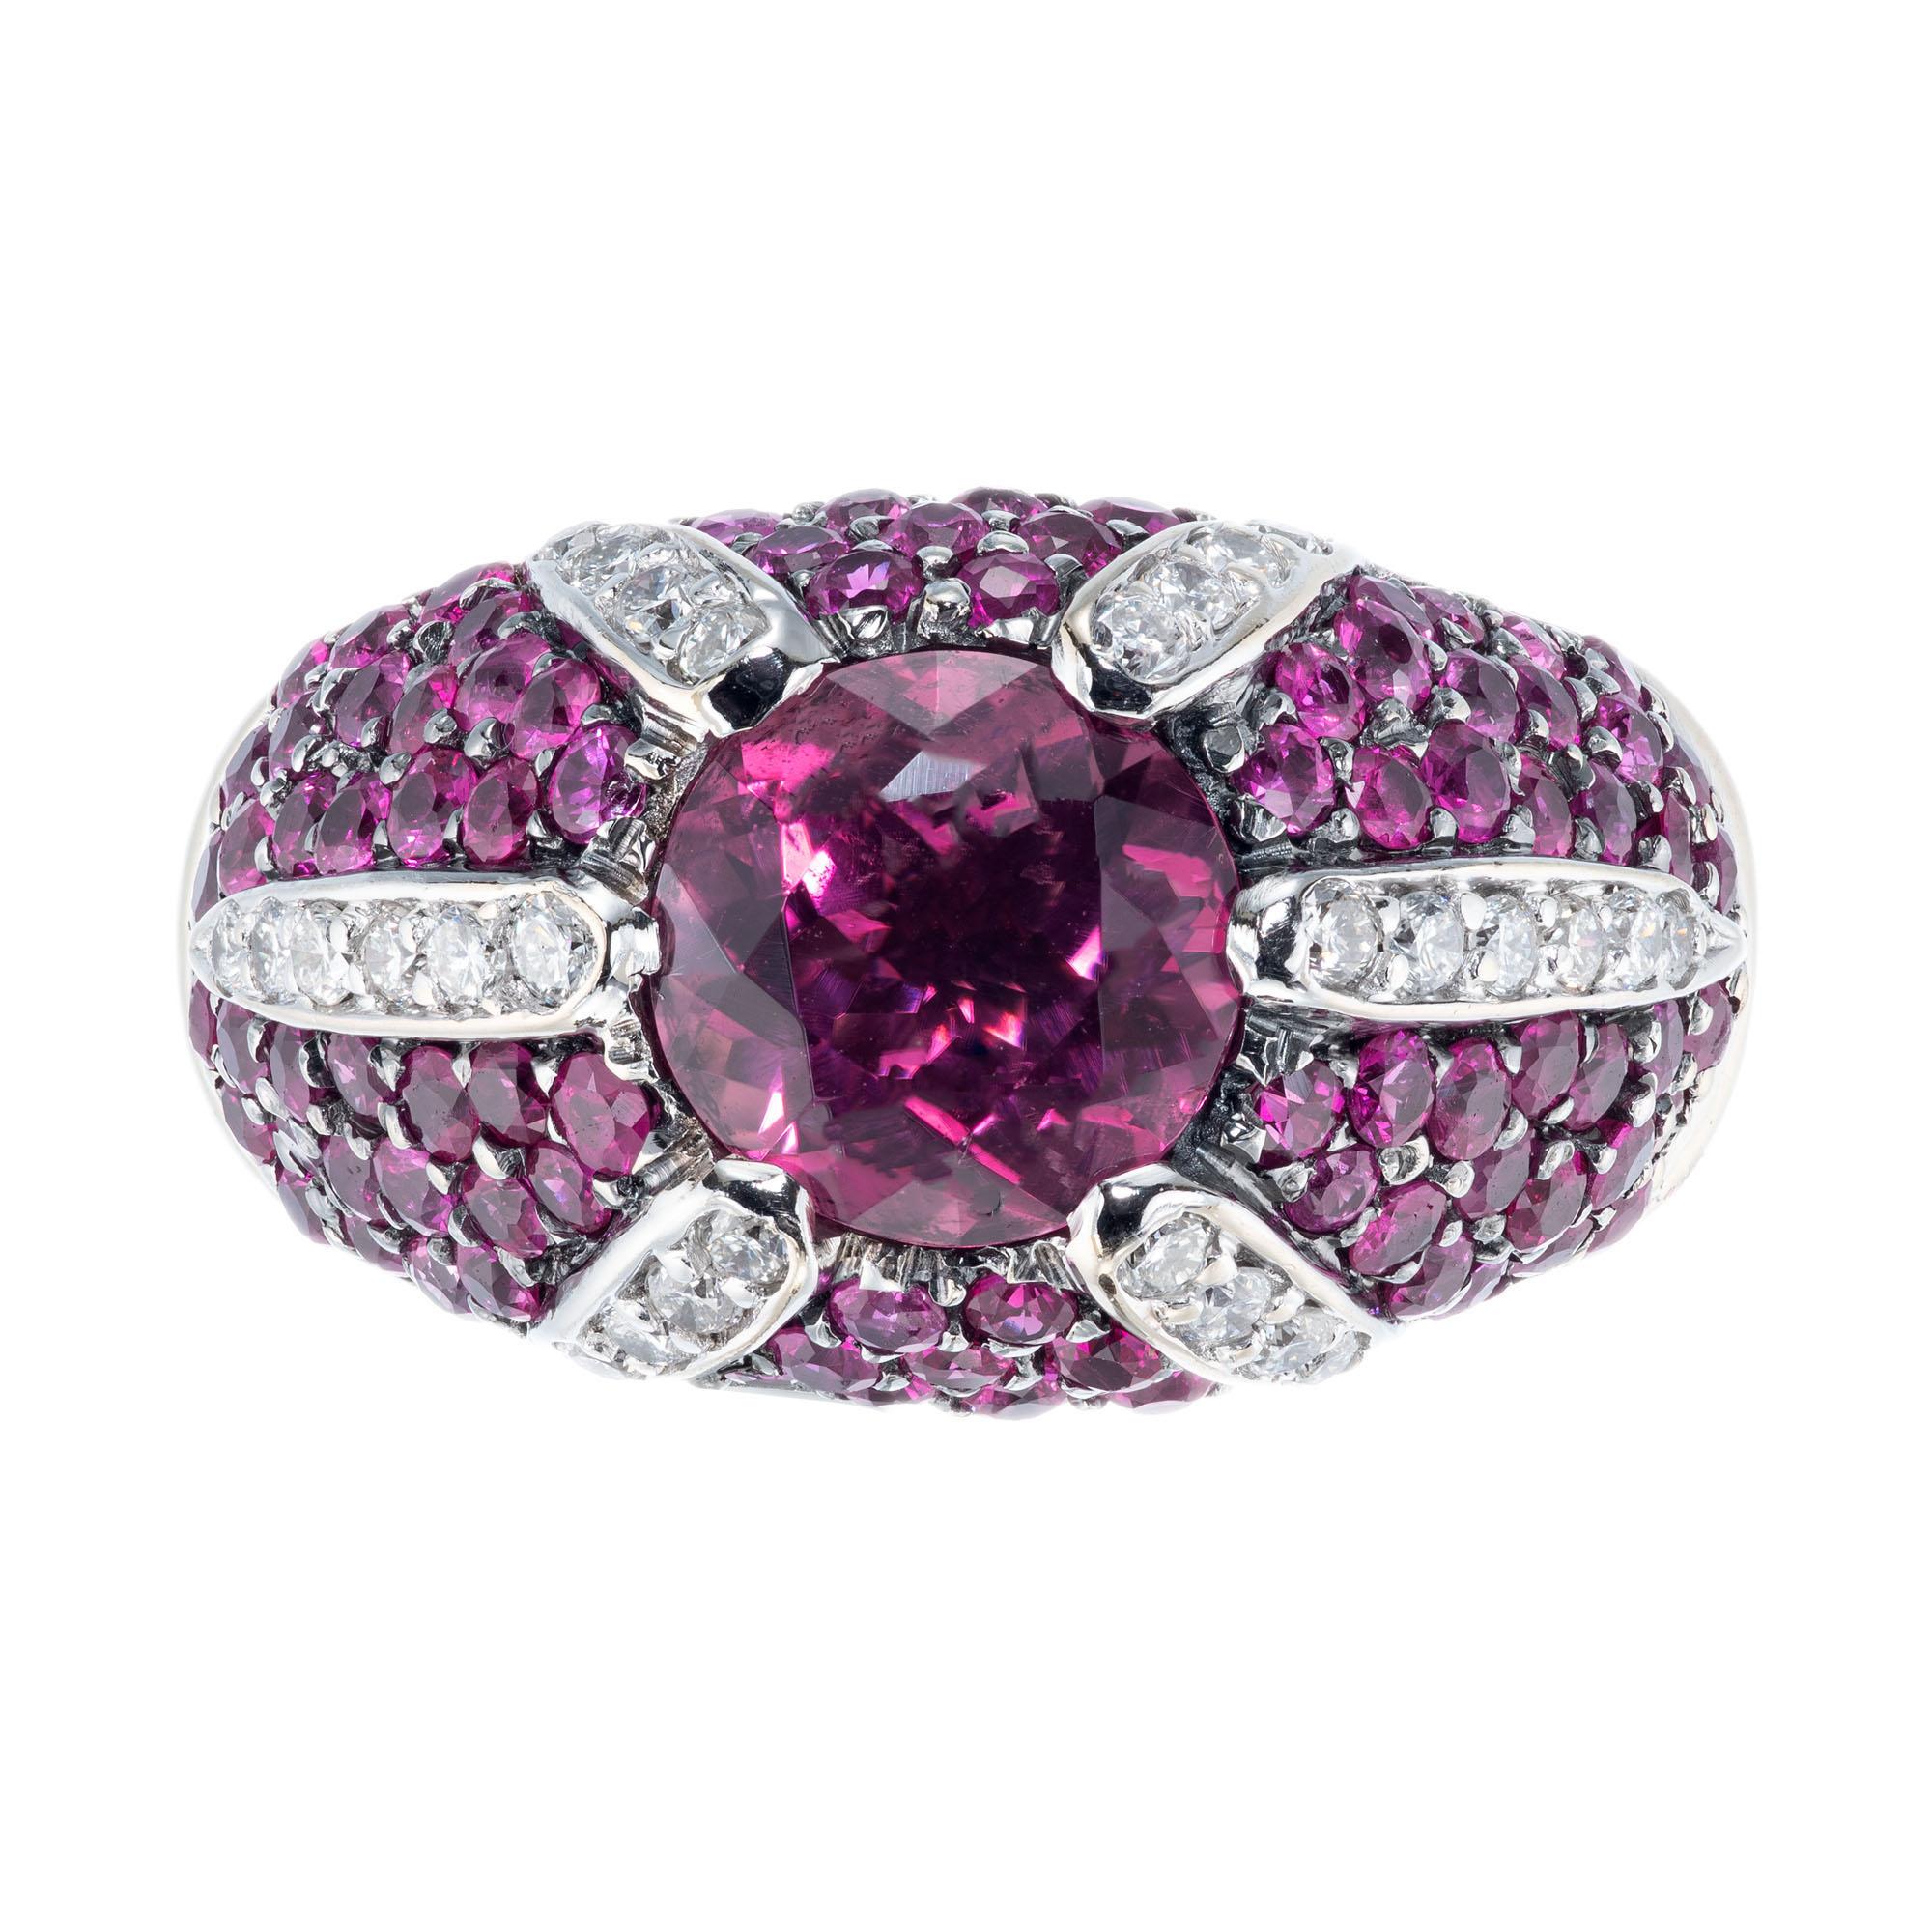 Sonia B round tourmaline, sapphire and diamond cocktail ring. 18k white gold setting with tourmaline center stone, round accent pink sapphires and white diamonds. 

1 pink Tourmaline approx. total weight 1.75ct
28 full cut diamonds approx. total